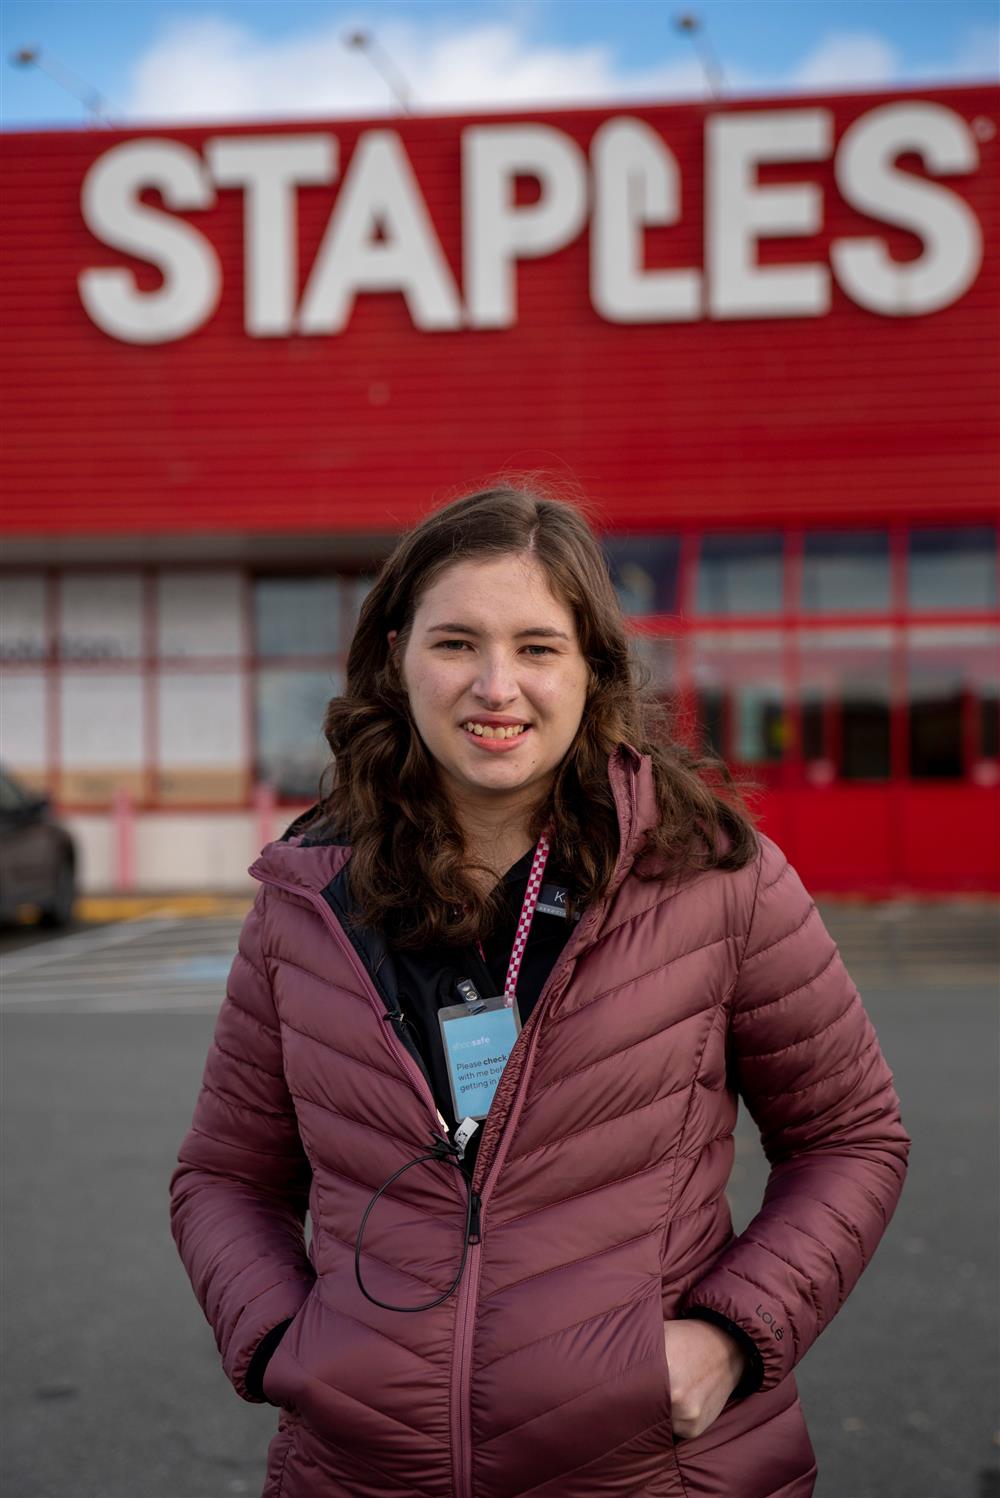 A young woman stands in a car park wearing a maroon jacket and black polo shirt. She is wearing a staff lanyard and looking at the camera and smiling. Behind her is the storefront of Staples. 